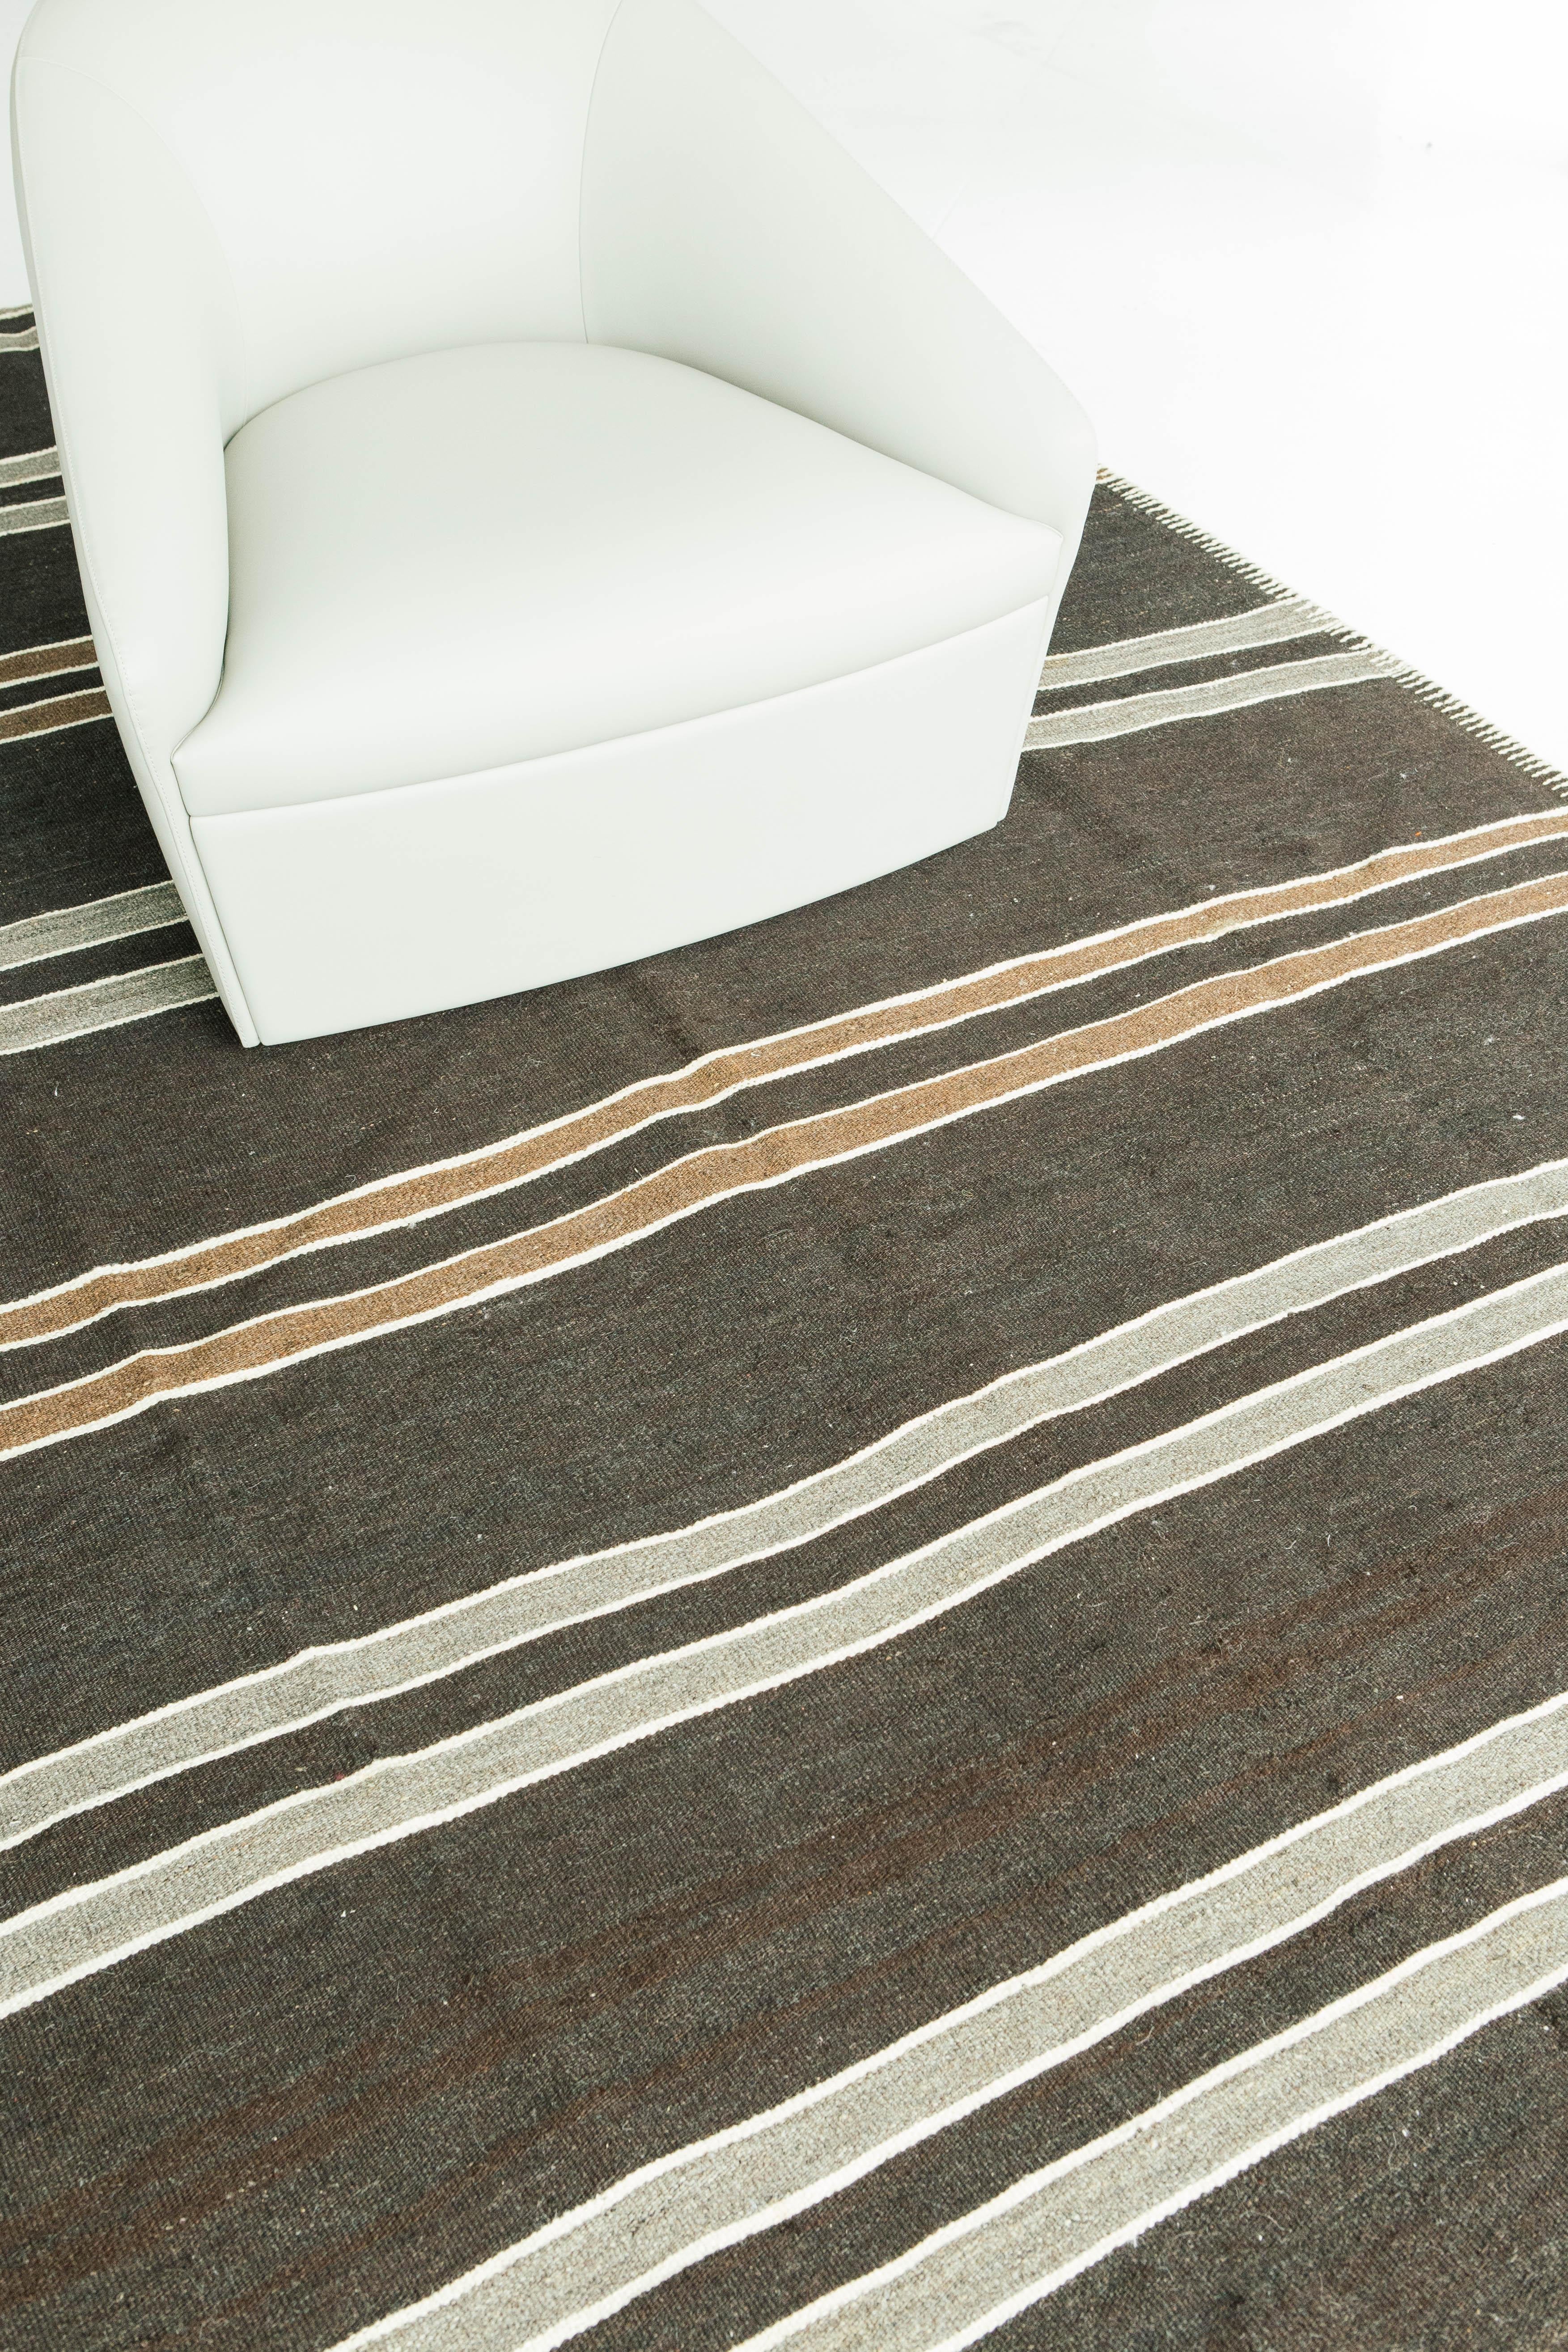 A vintage Anatolian Turkish flat-weave Kilim in a chocolate brown with taupe, tiger orange, and ivory stripes. This antique wool piece weaves together dyes and colors, motifs, textures and techniques that are popular in Anatolia or Asia Minor. The